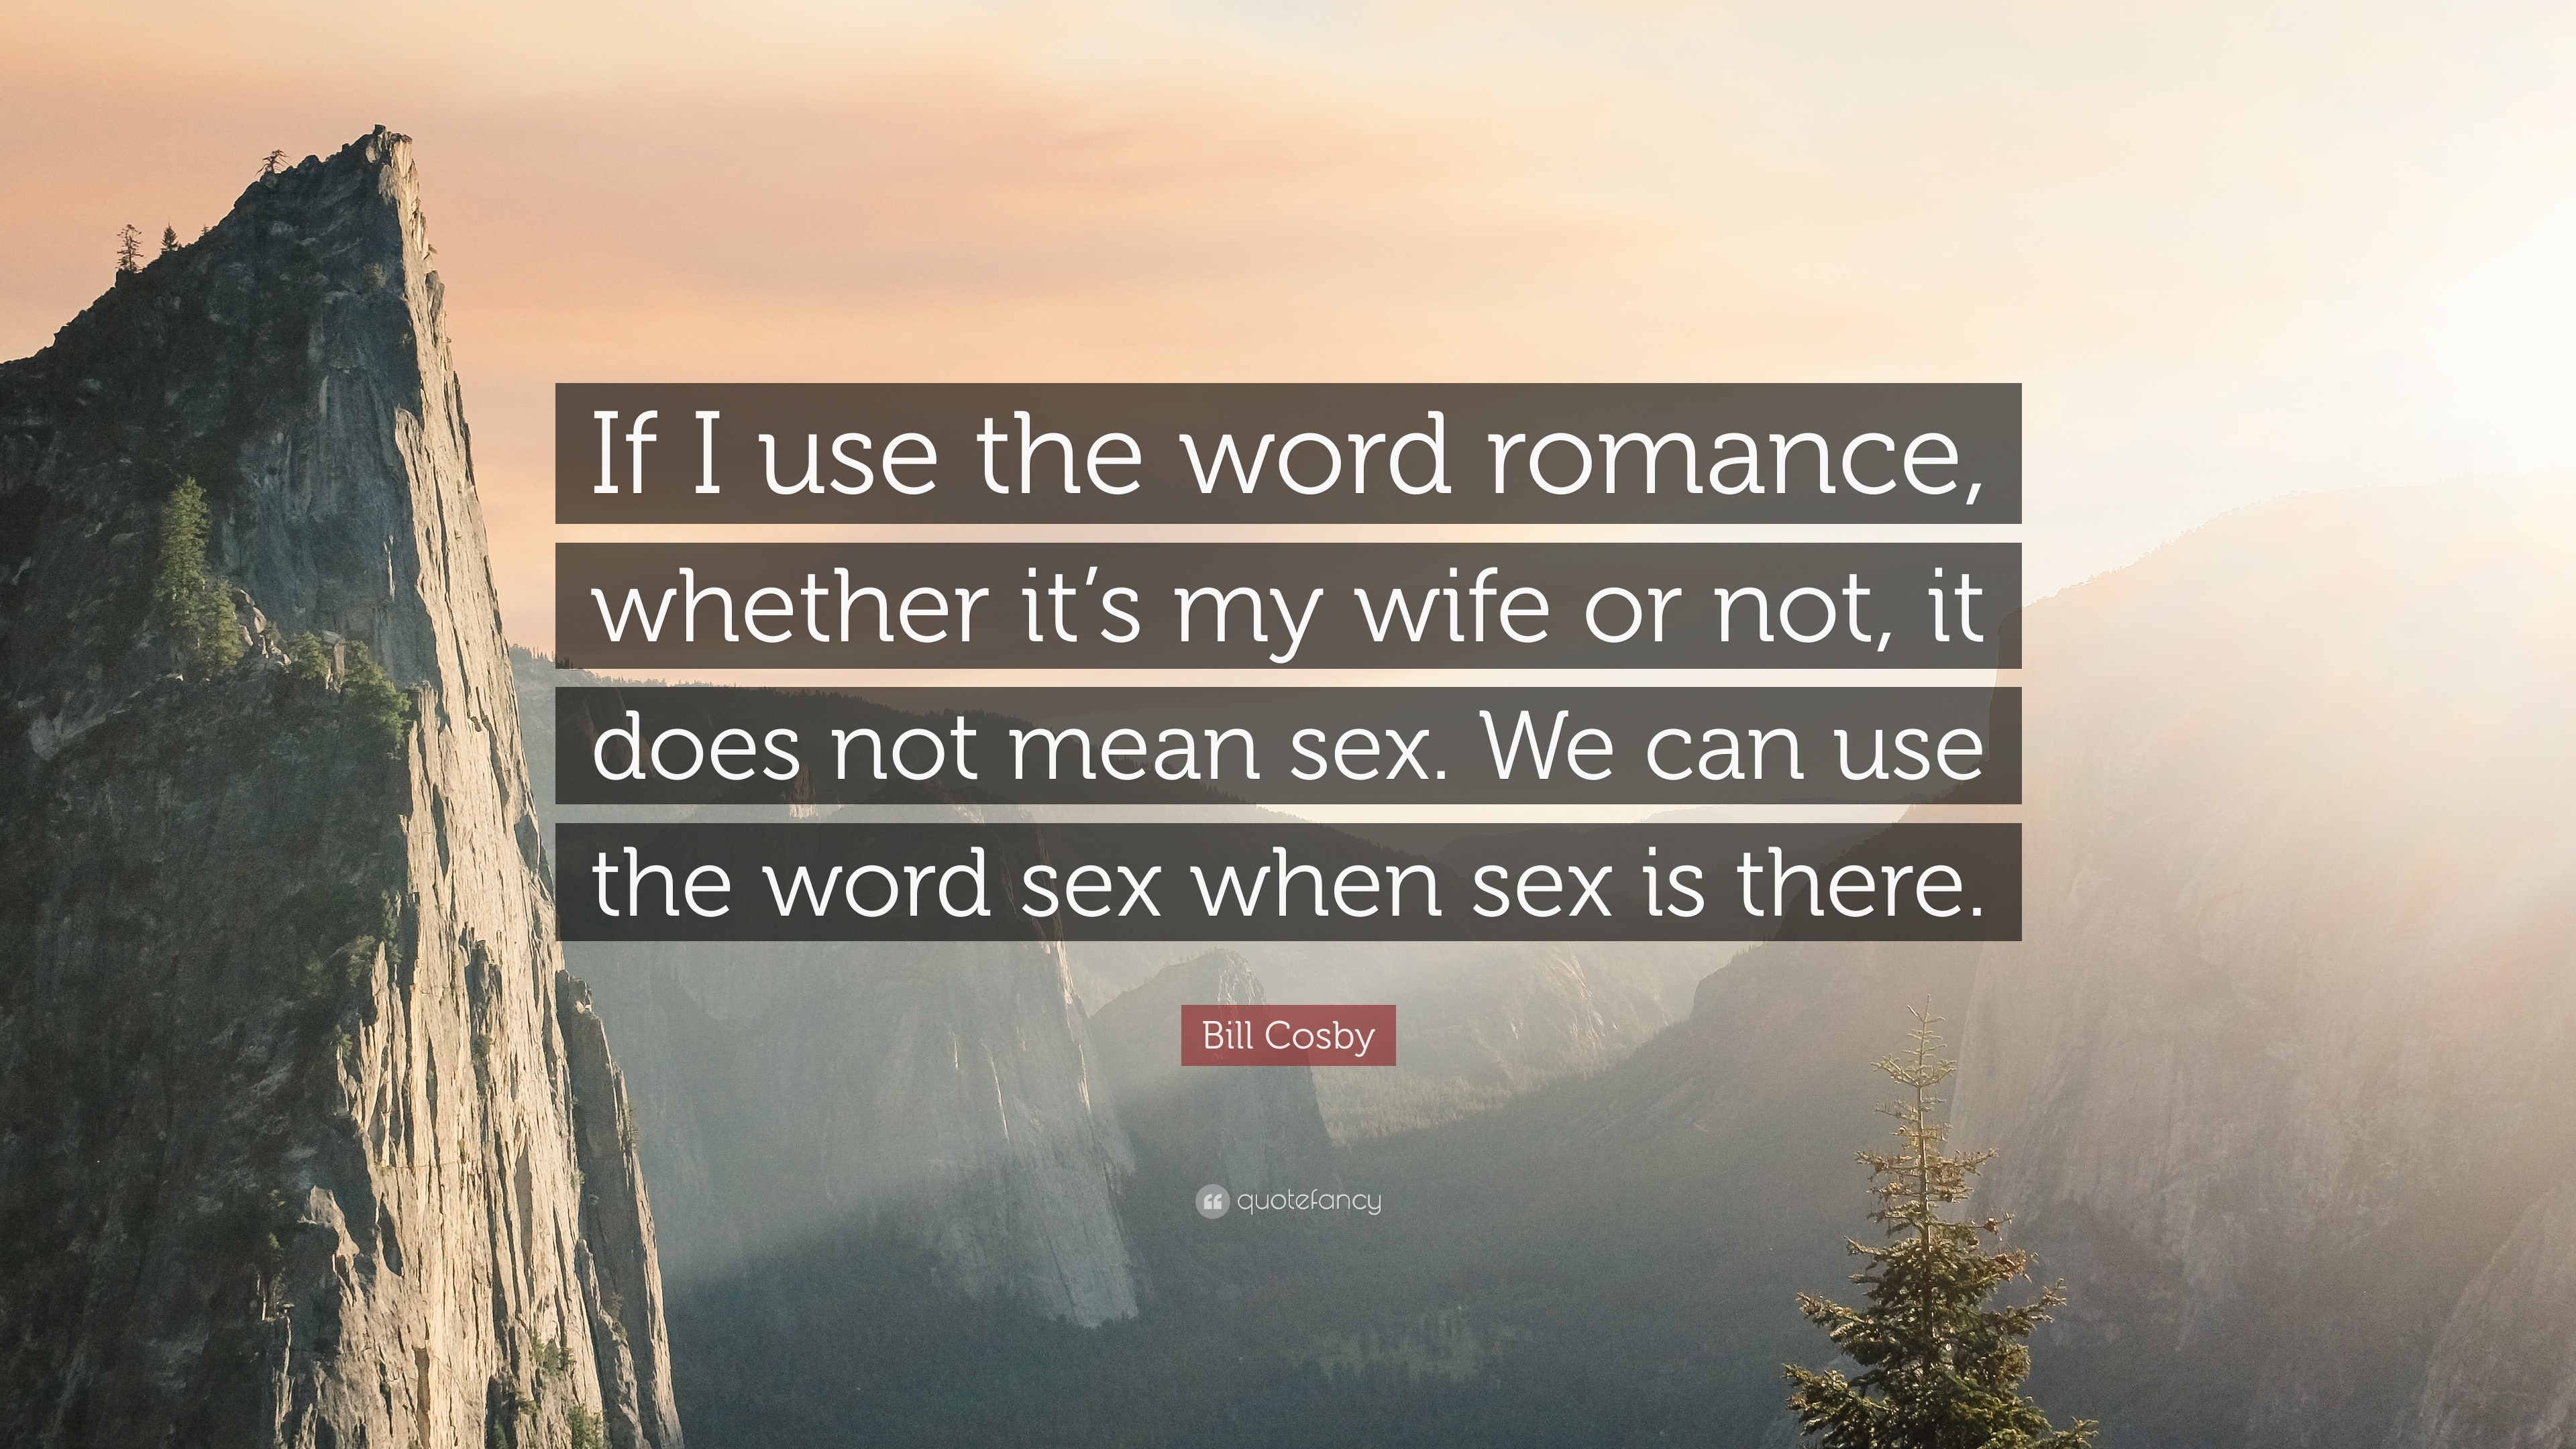 Bill Cosby Quote “If I use the word romance, whether its my wife or not, it image picture